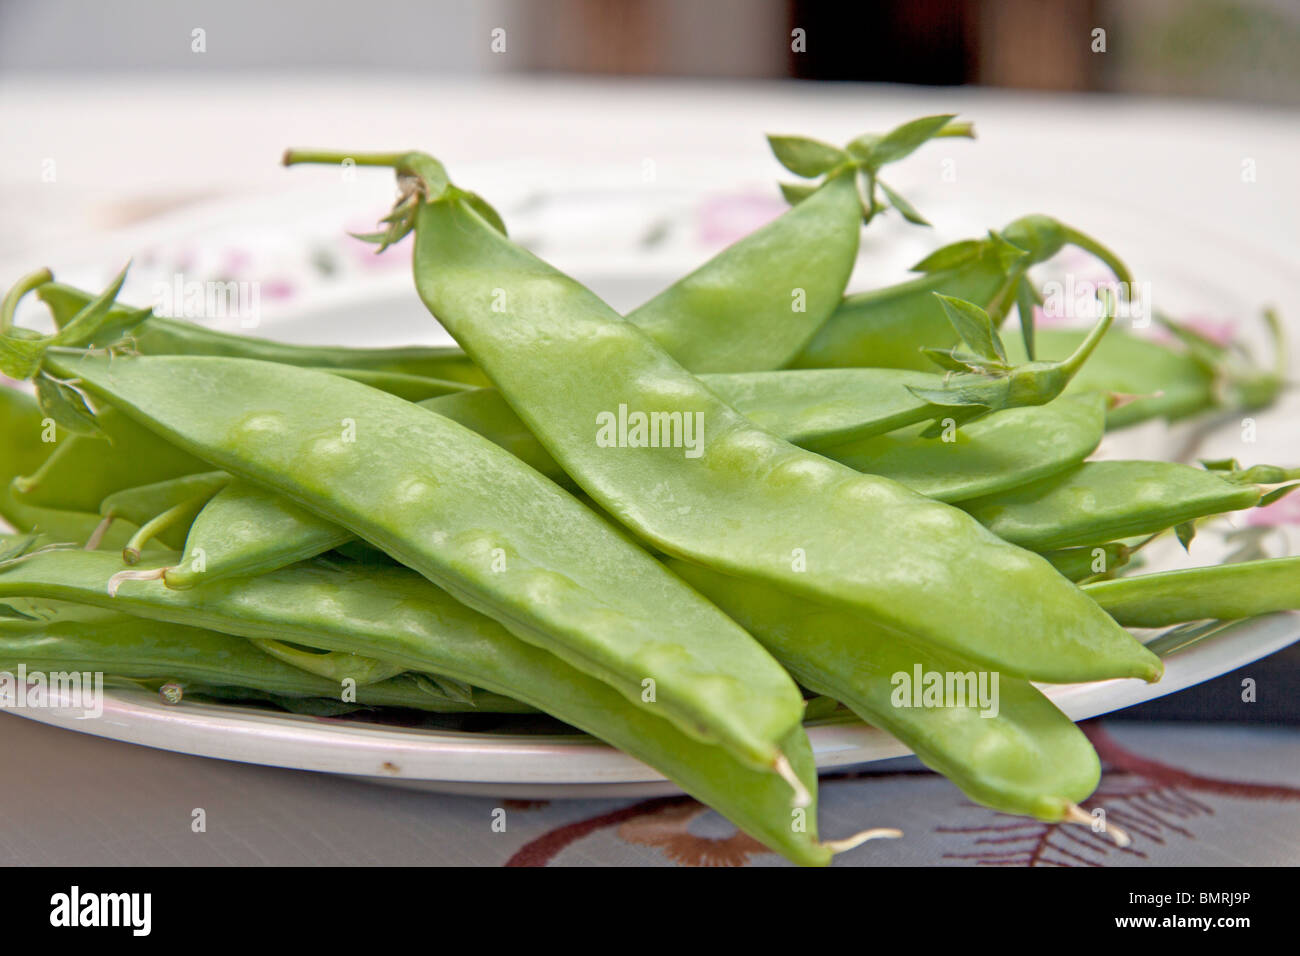 fresh green snow peas freshly picked placed on a plate. Stock Photo